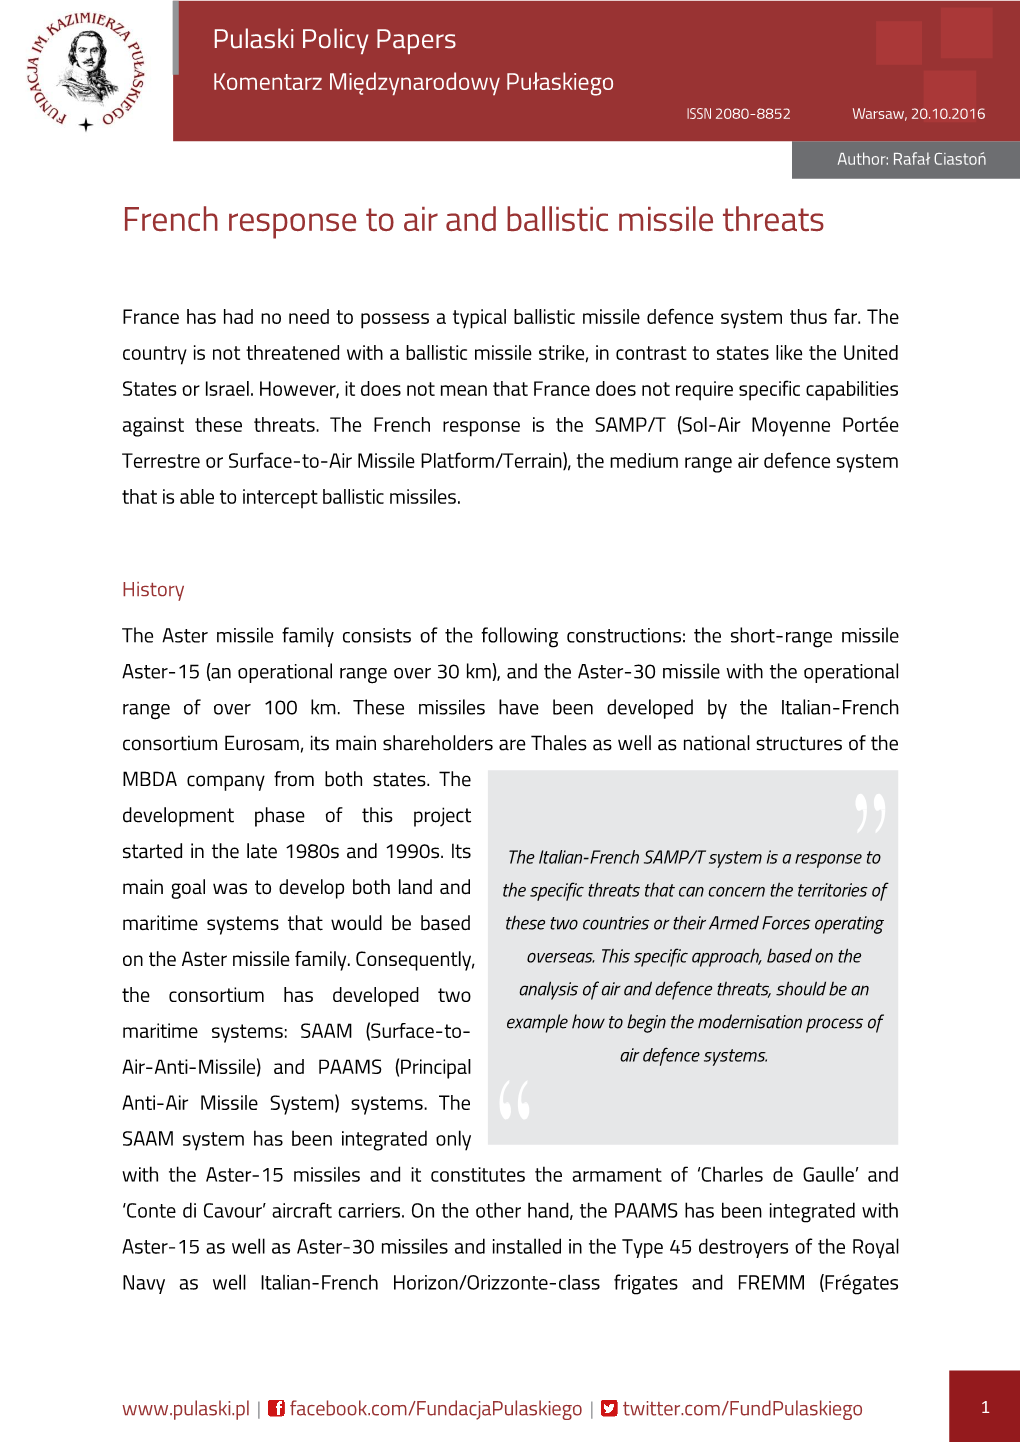 French Response to Air and Ballistic Missile Threats